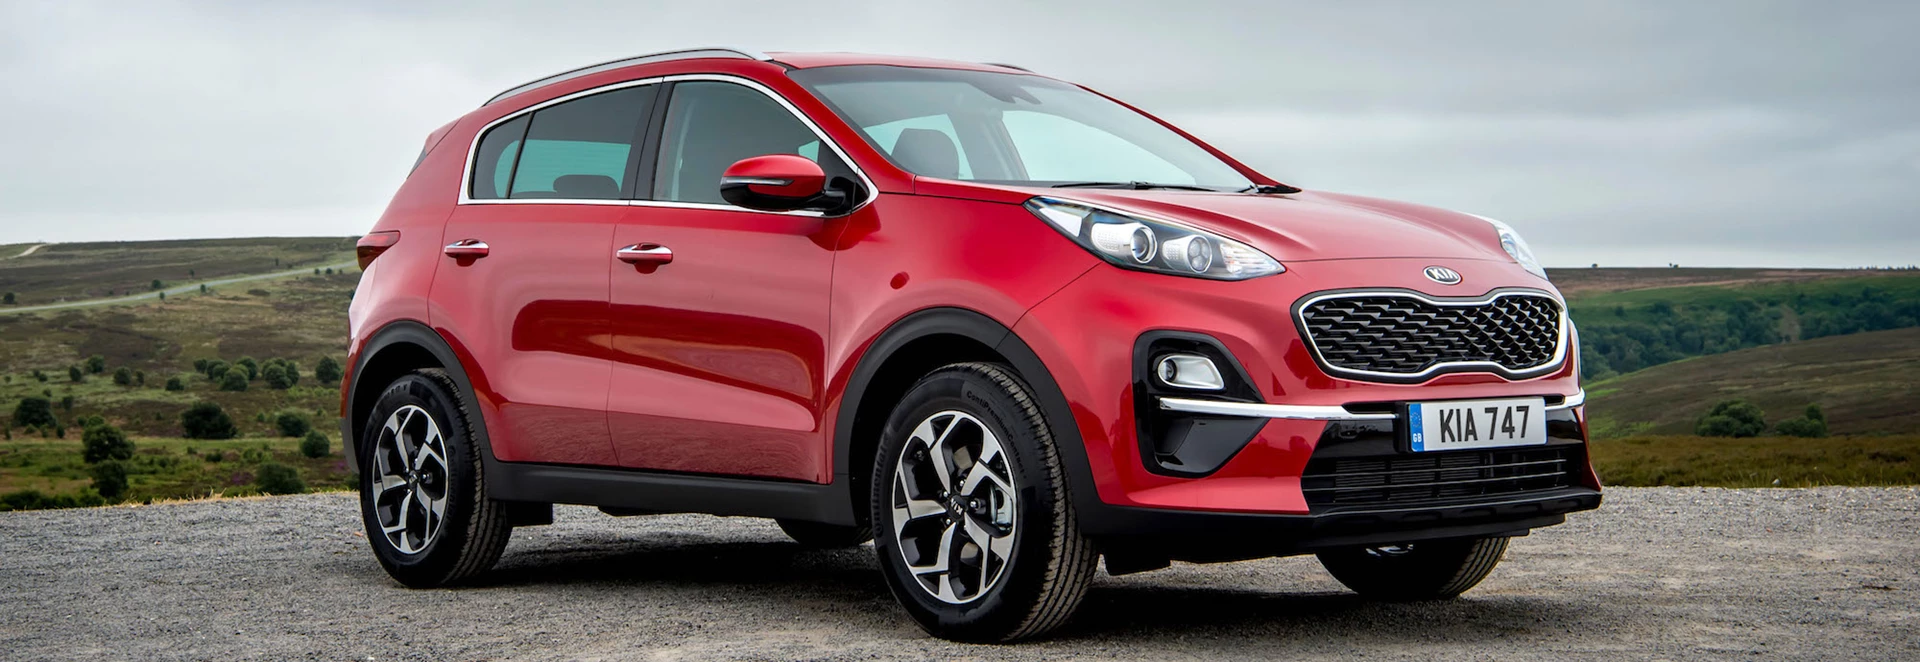 Kia releases pricing for updated Sportage